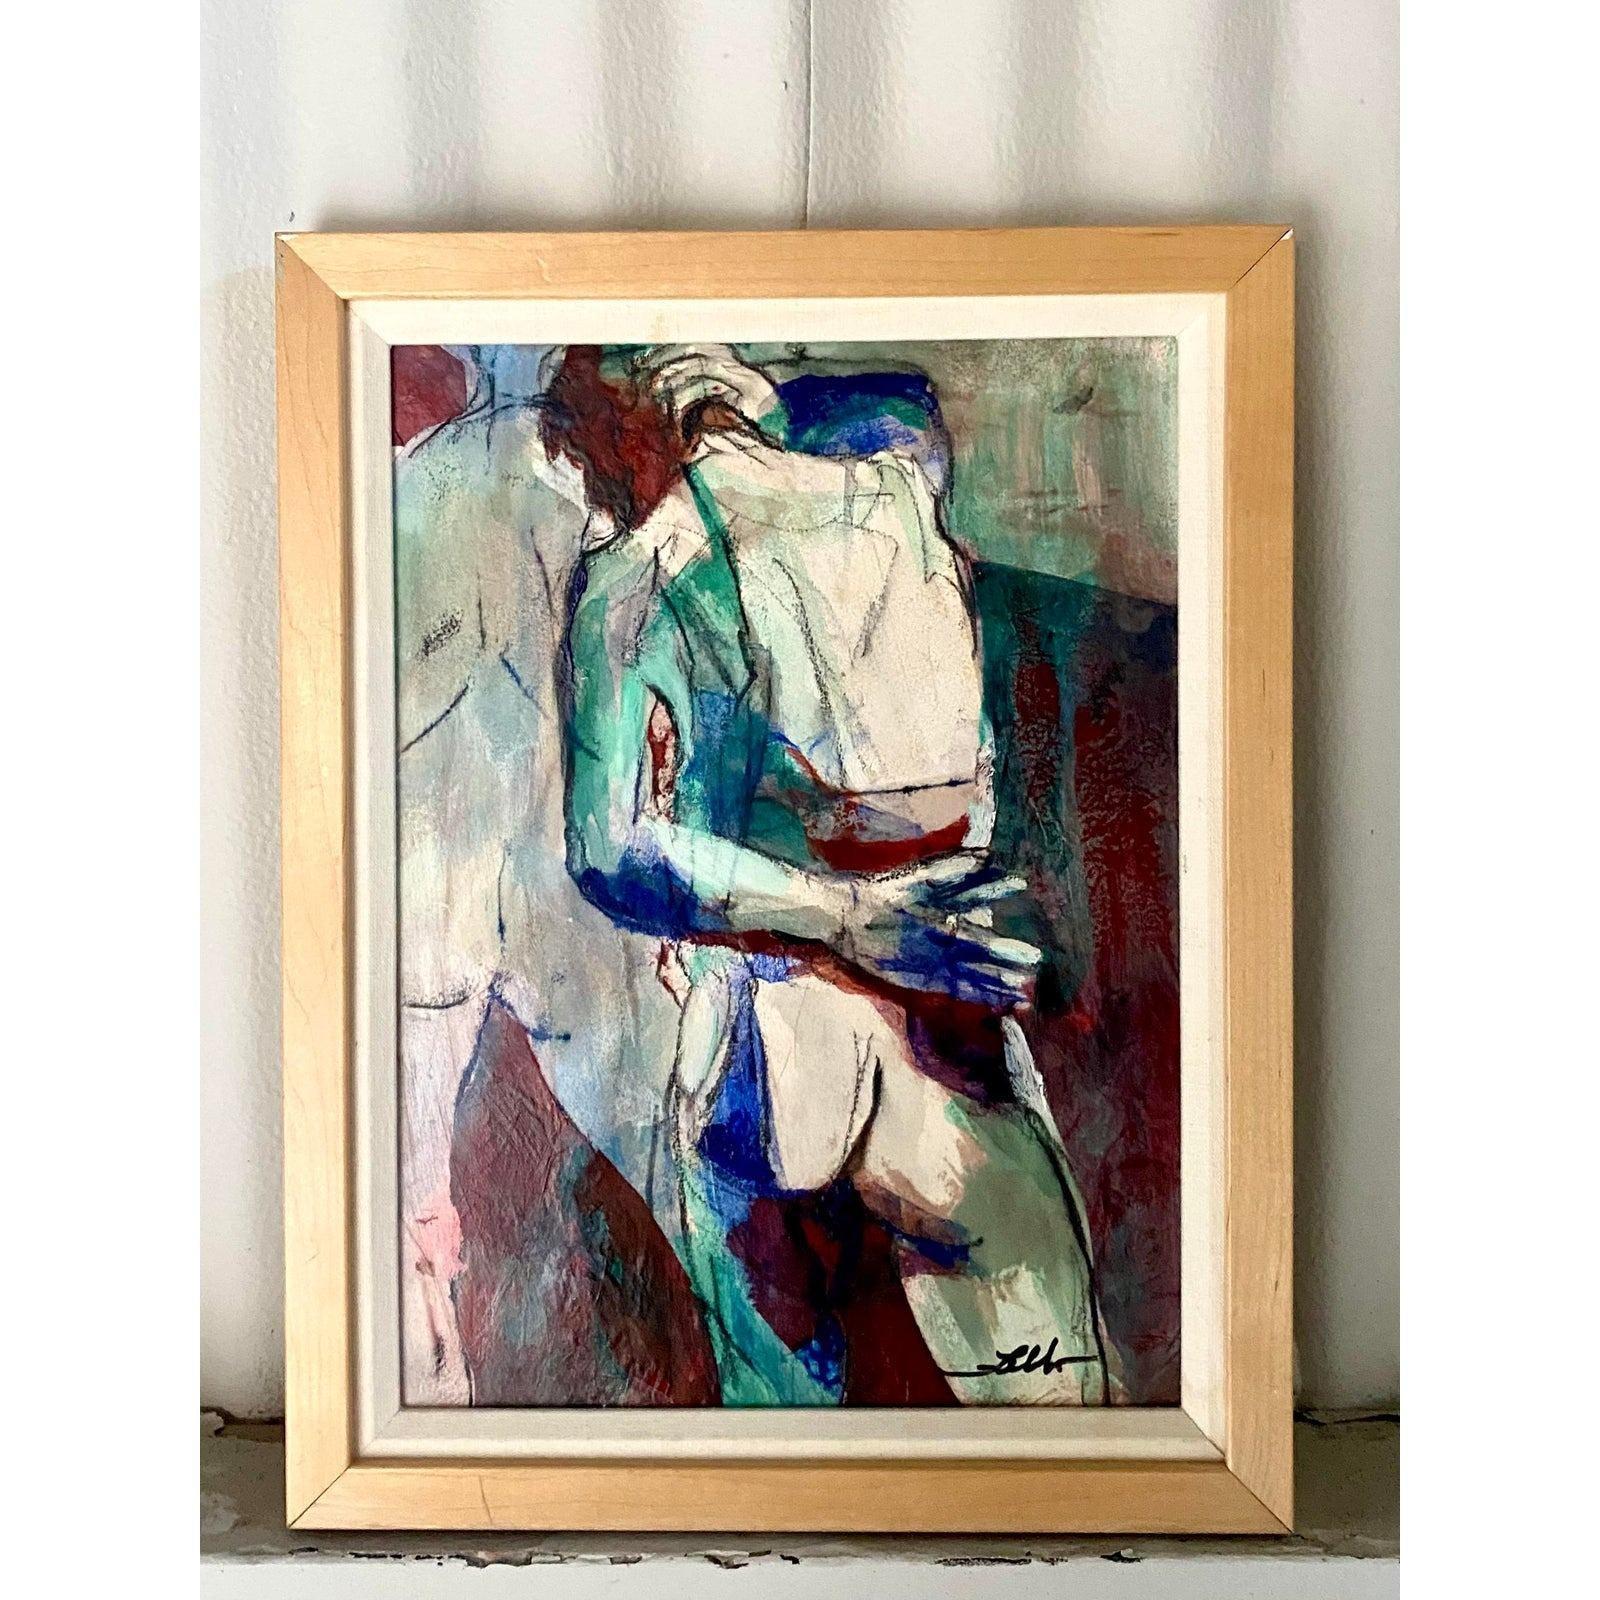 Fantastic Midcentury Abstract original oil painting. Signed by the artist Faldo. A beautiful composition of a male nude. Clear beautiful colors. Acquired from a Palm Beach estate.